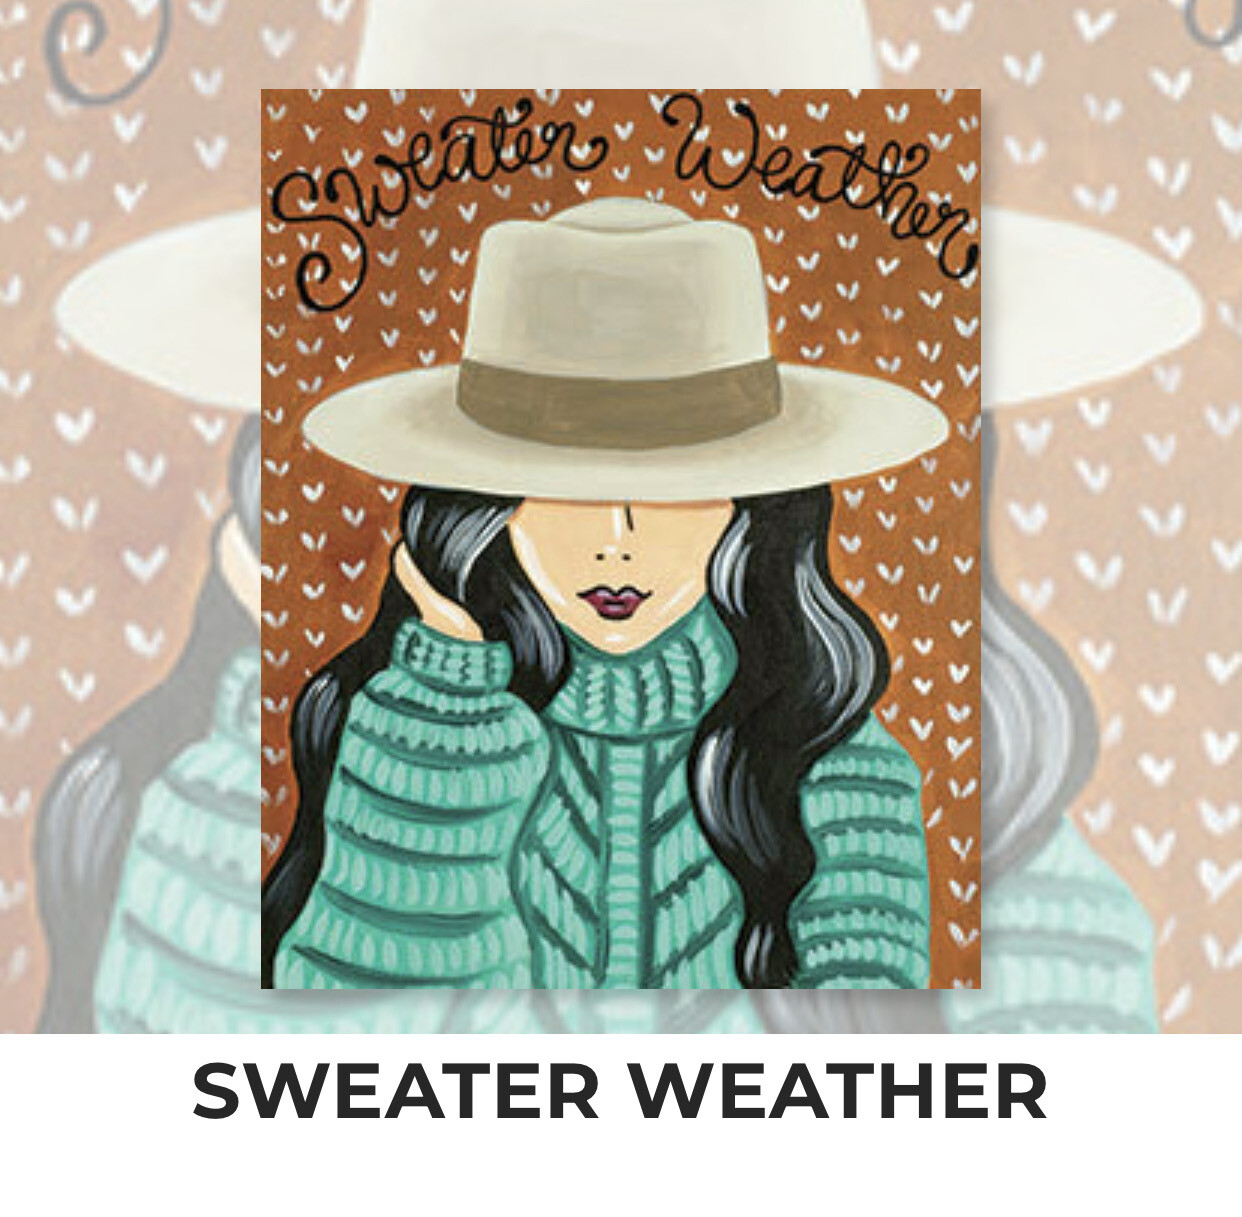 Sweater Weather ADULT Acrylic Paint On Canvas DIY Art Kit - 3 Week Special Order